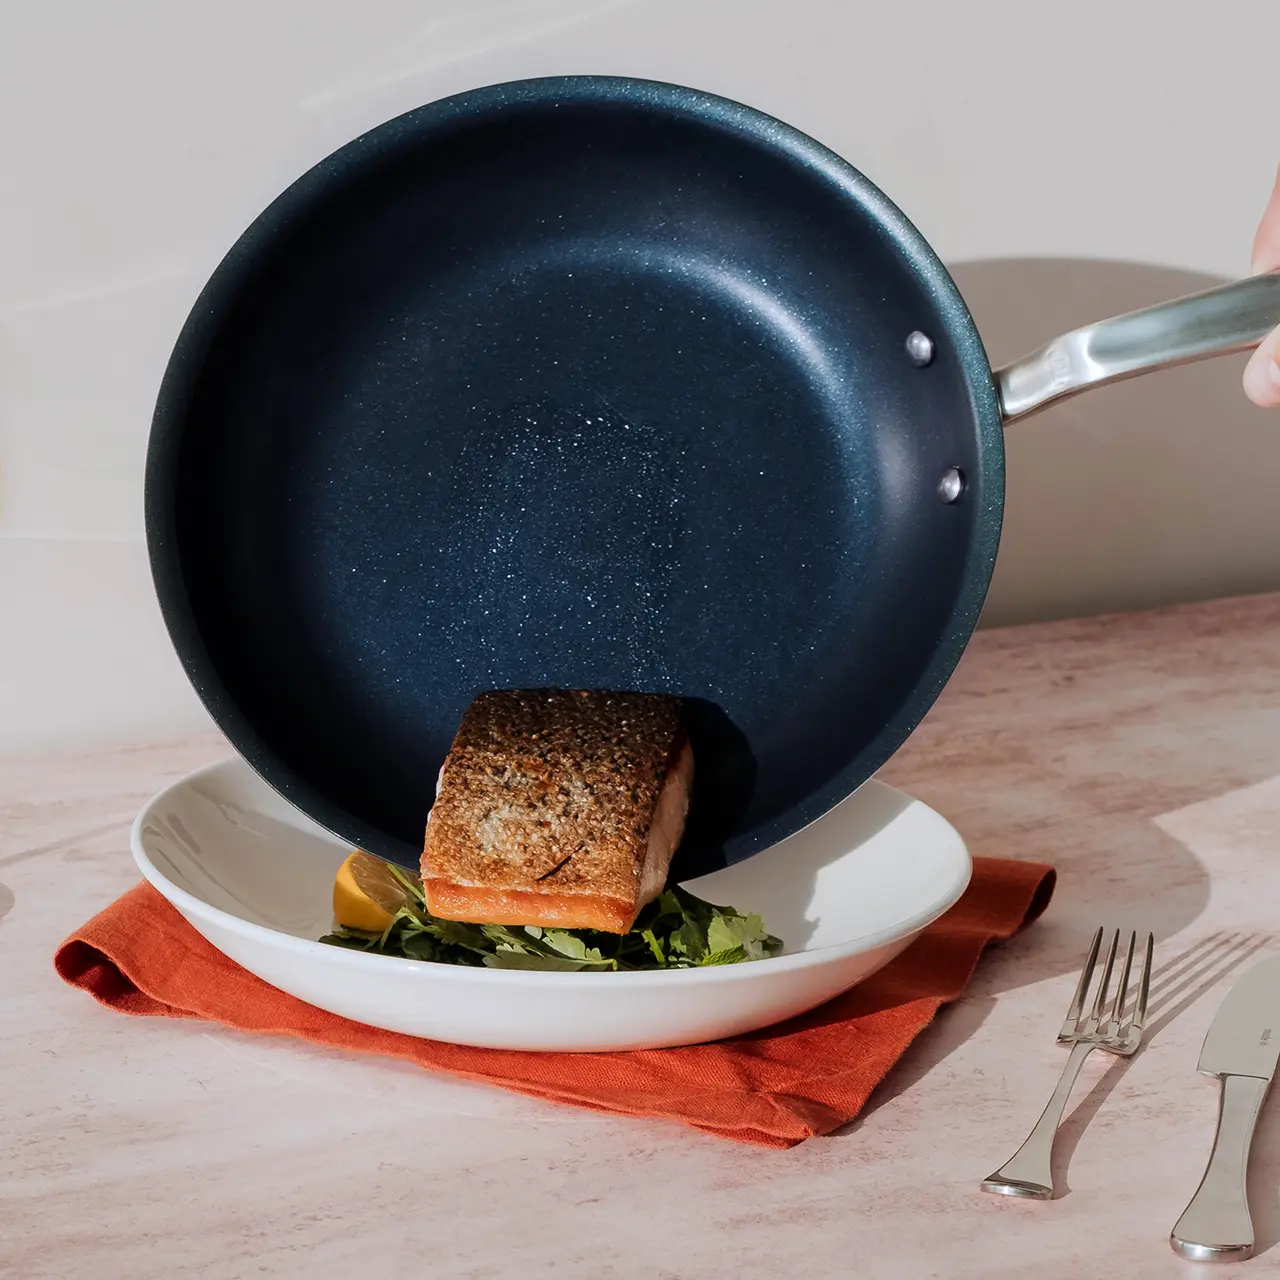 A seared piece of fish rests atop a bed of greens on a white plate, partially covered by a tilted blue frying pan, with a fork and knife placed beside on a light surface with a red napkin underneath.